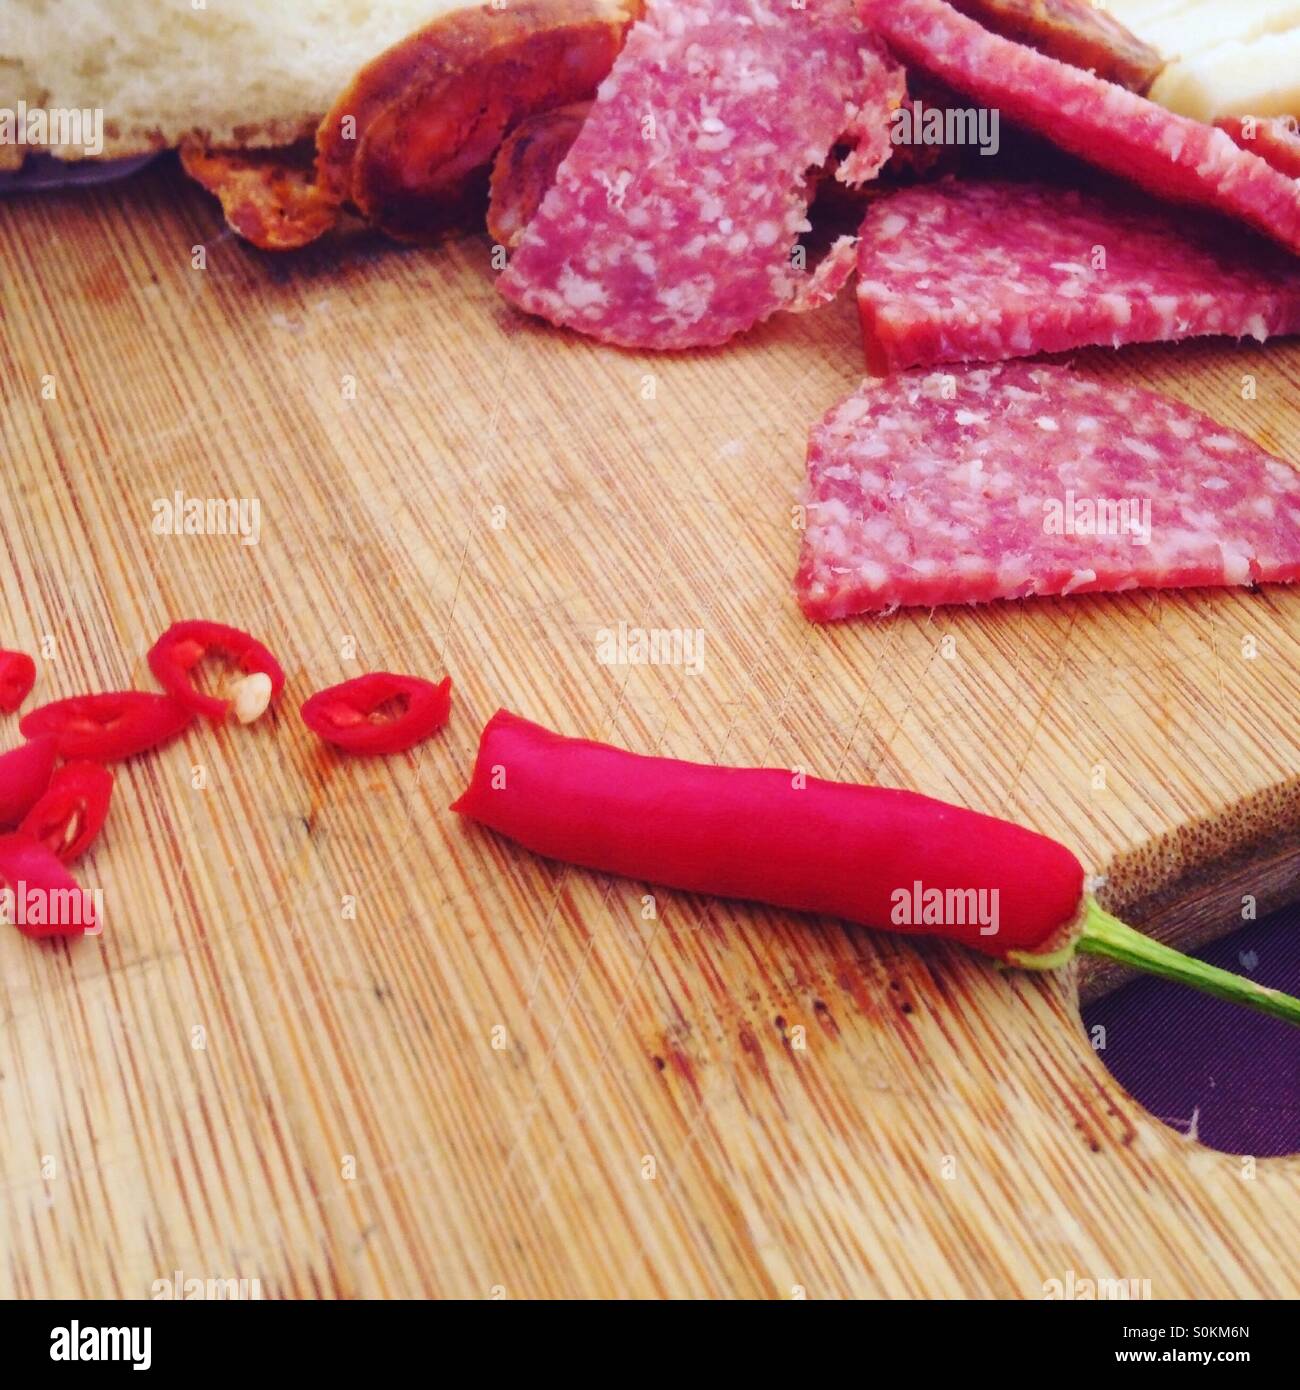 Spicy red chili pepper with salami sausage Stock Photo